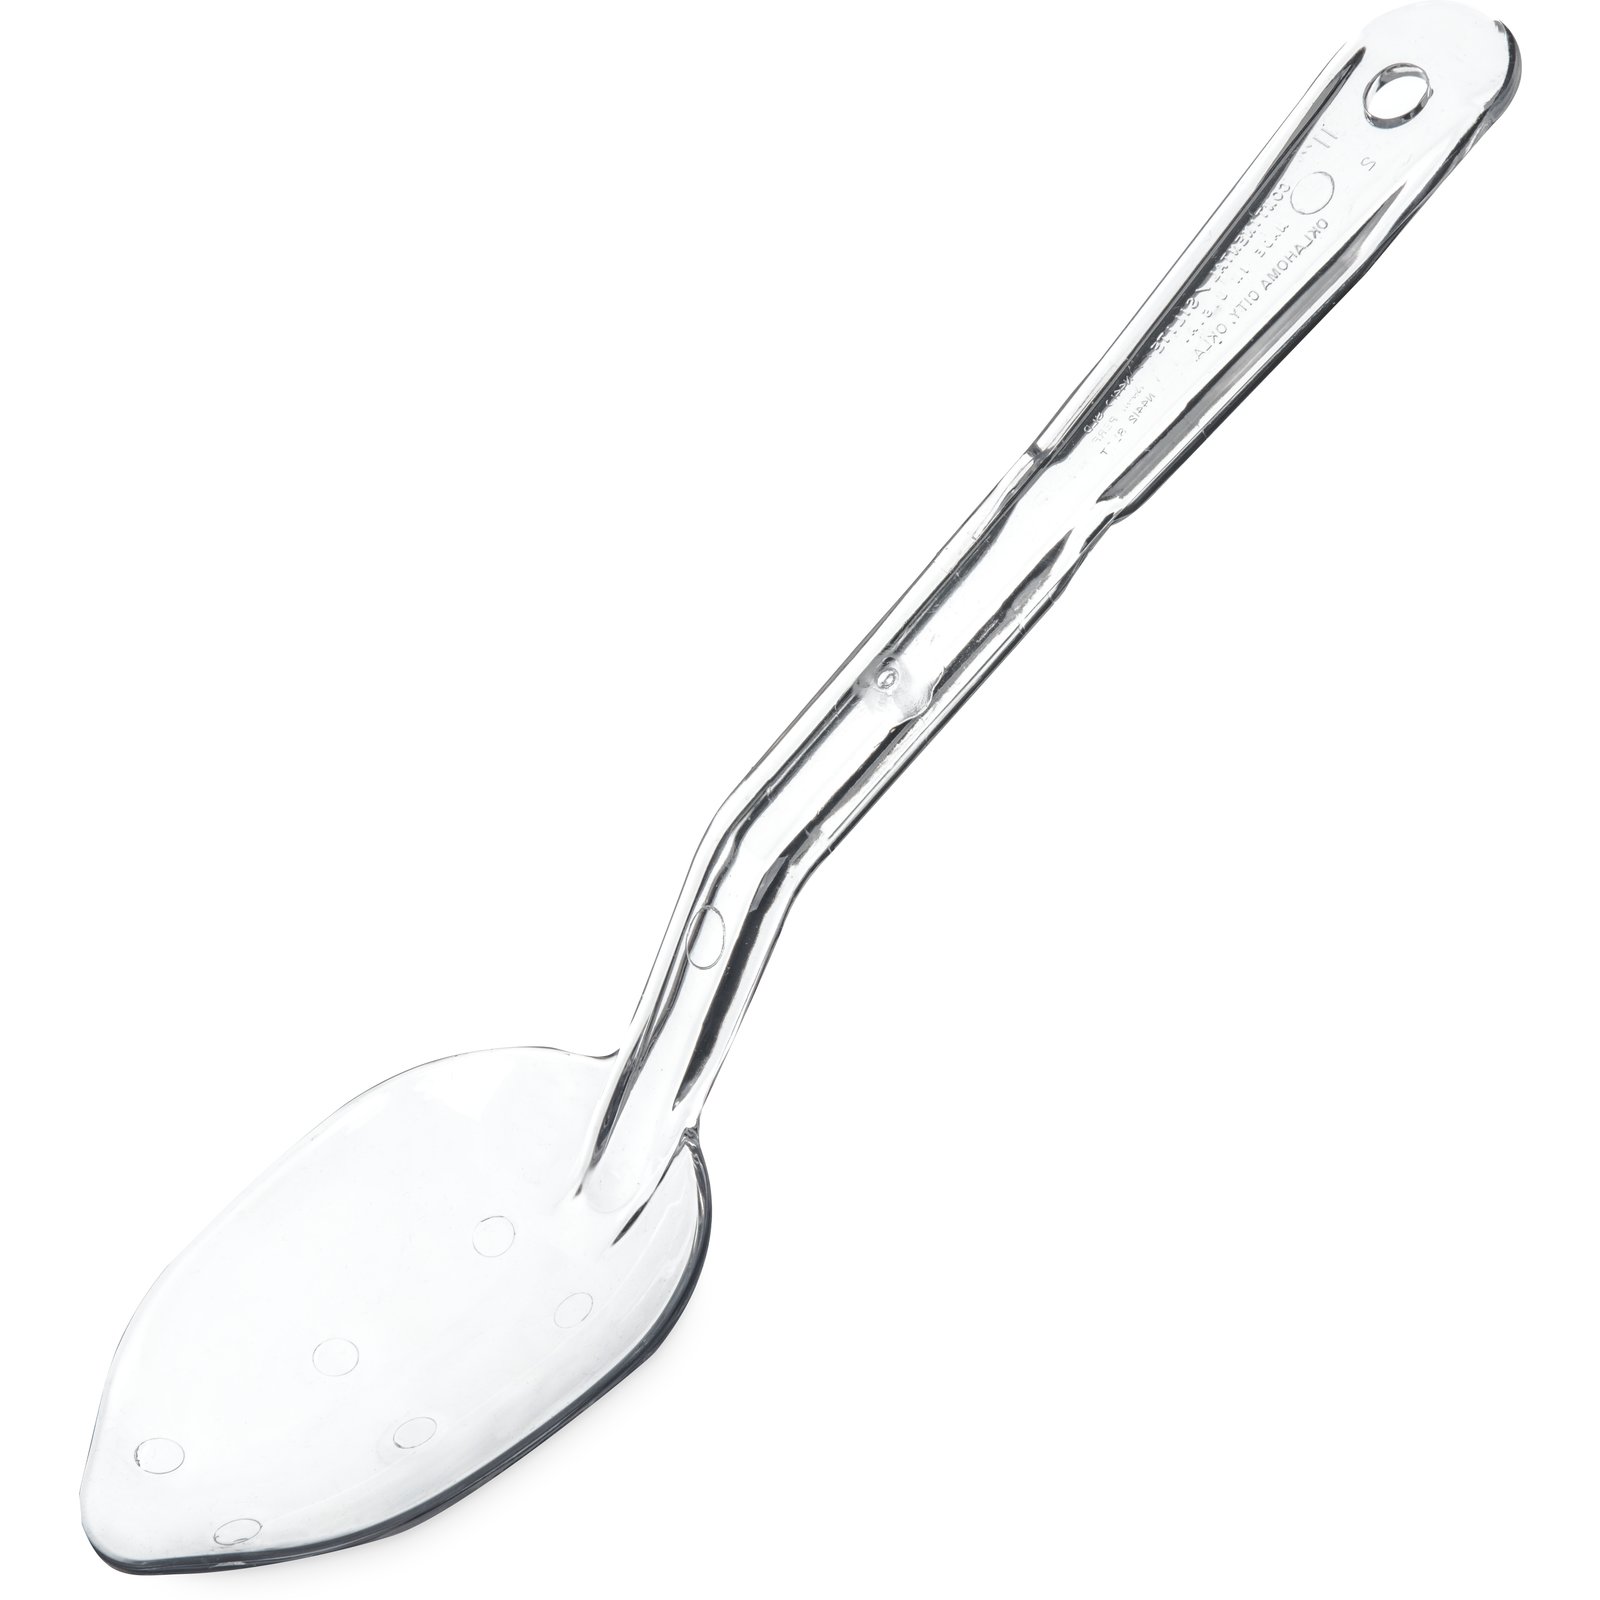 Clear Serving Spoon